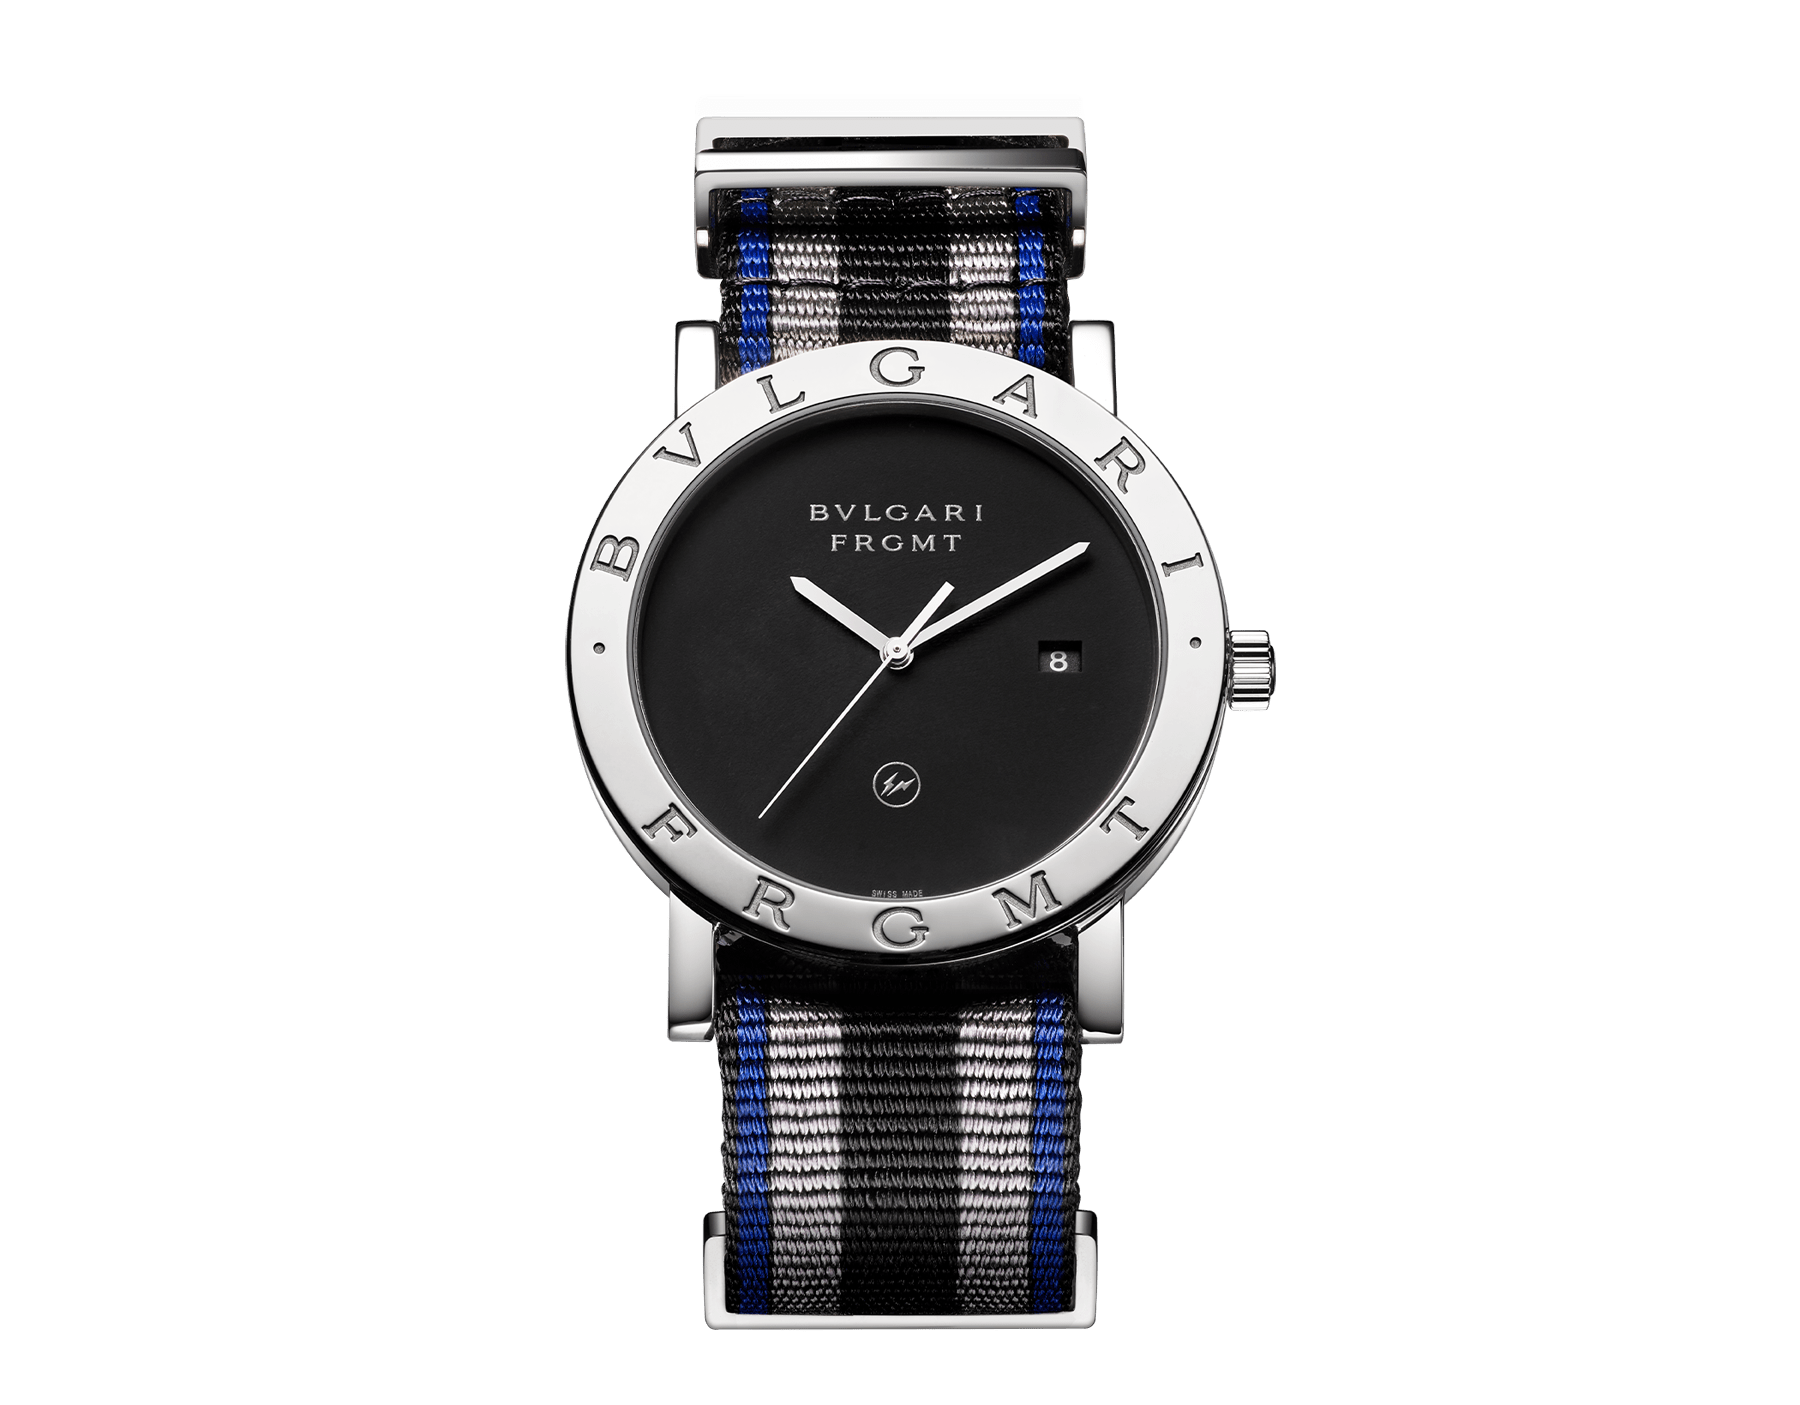 BVLGARI BVLGARI Fragment Design watch with manufacture mechanical movement, automatic winding, stainless steel case, bezel engraved with the special BVLGARI FRGMT logo, black dial and black nylon bracelet. Water-resistant up to 50 metres. 103570 image 1